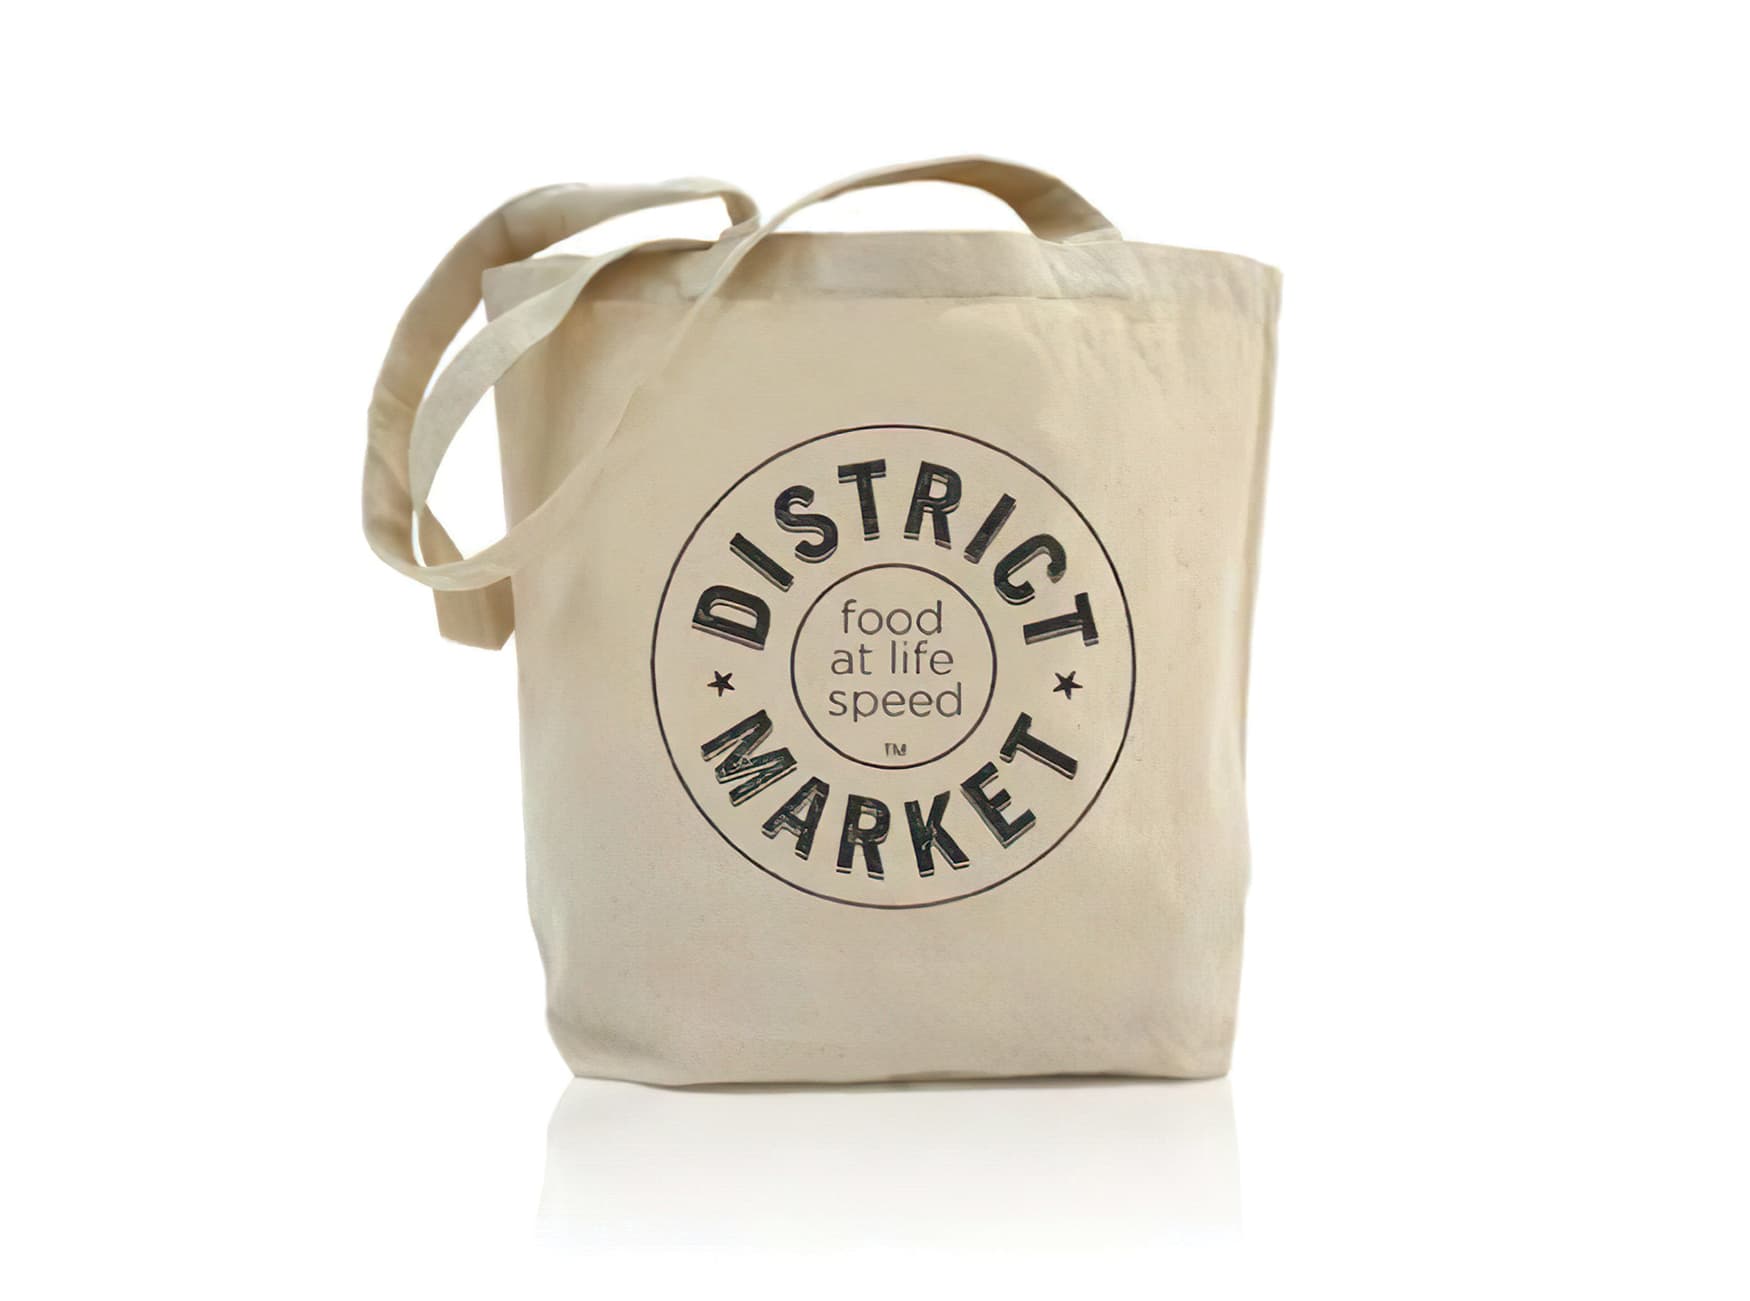 District Market, a student market located by the University of Washington's campus. Branding and Logo Design.